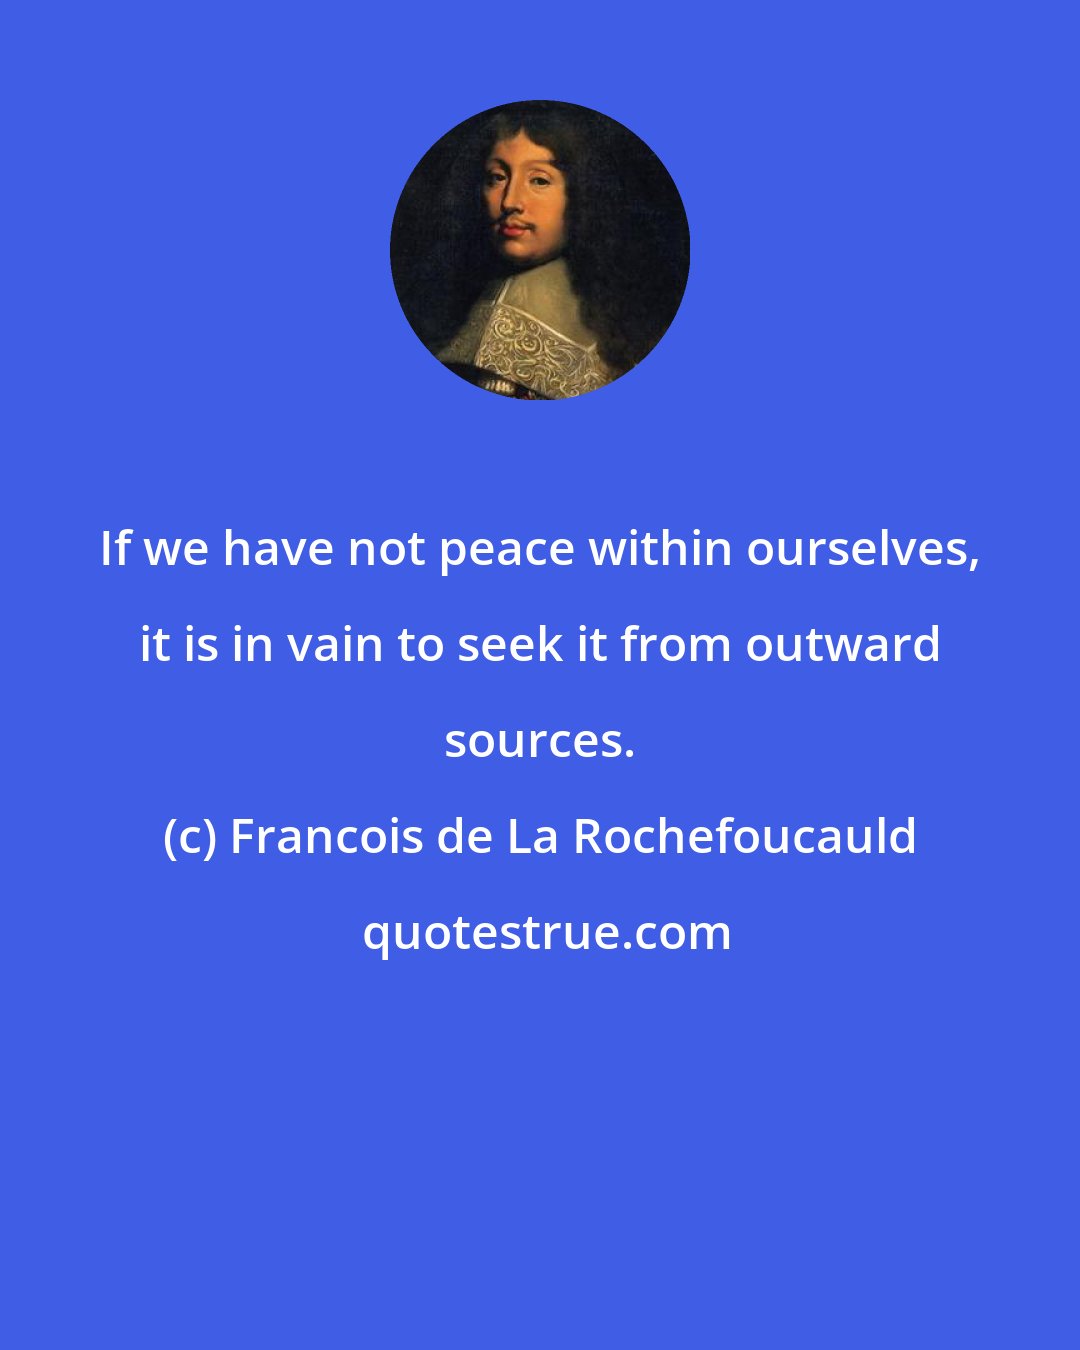 Francois de La Rochefoucauld: If we have not peace within ourselves, it is in vain to seek it from outward sources.